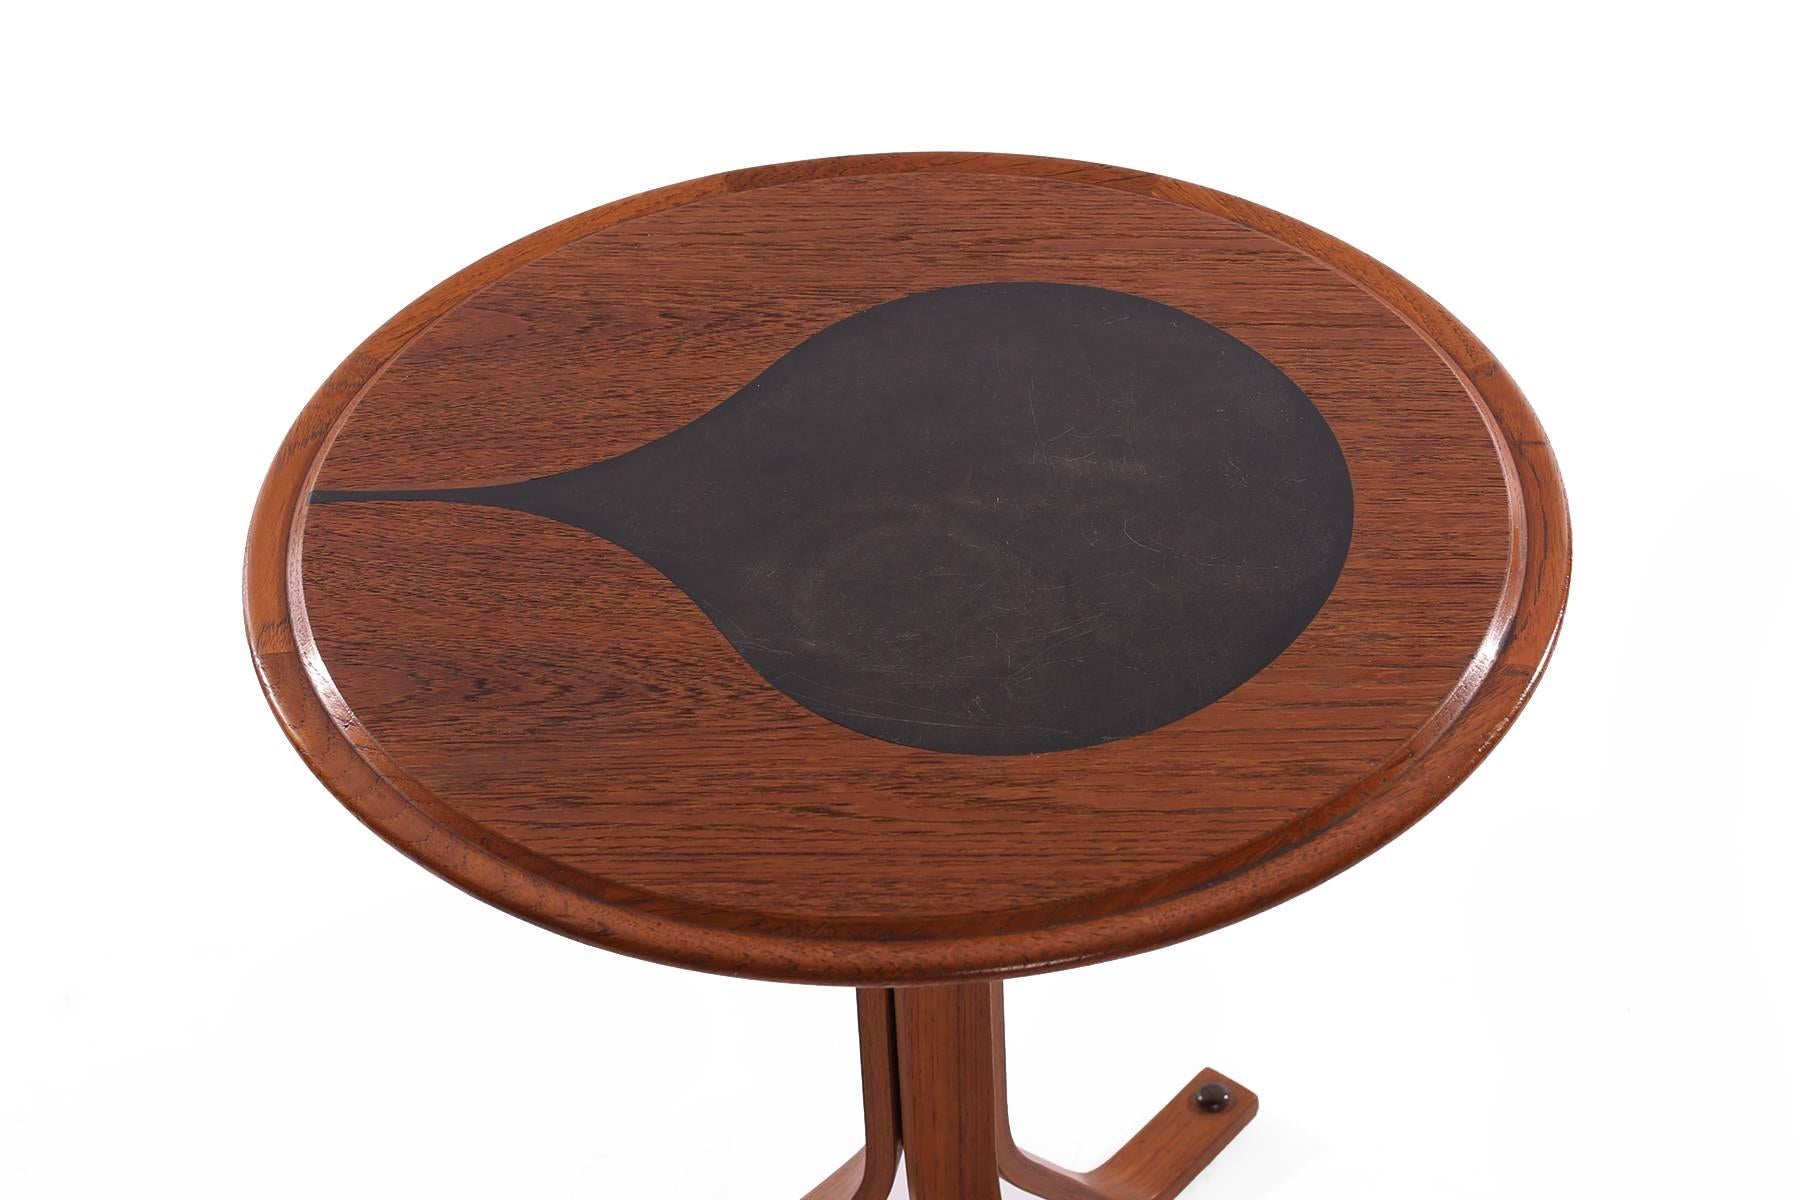 Teak and laminate side table by Selig, circa mid-1960s. This all original example has bentwood solid teak legs with inset solid teak top.